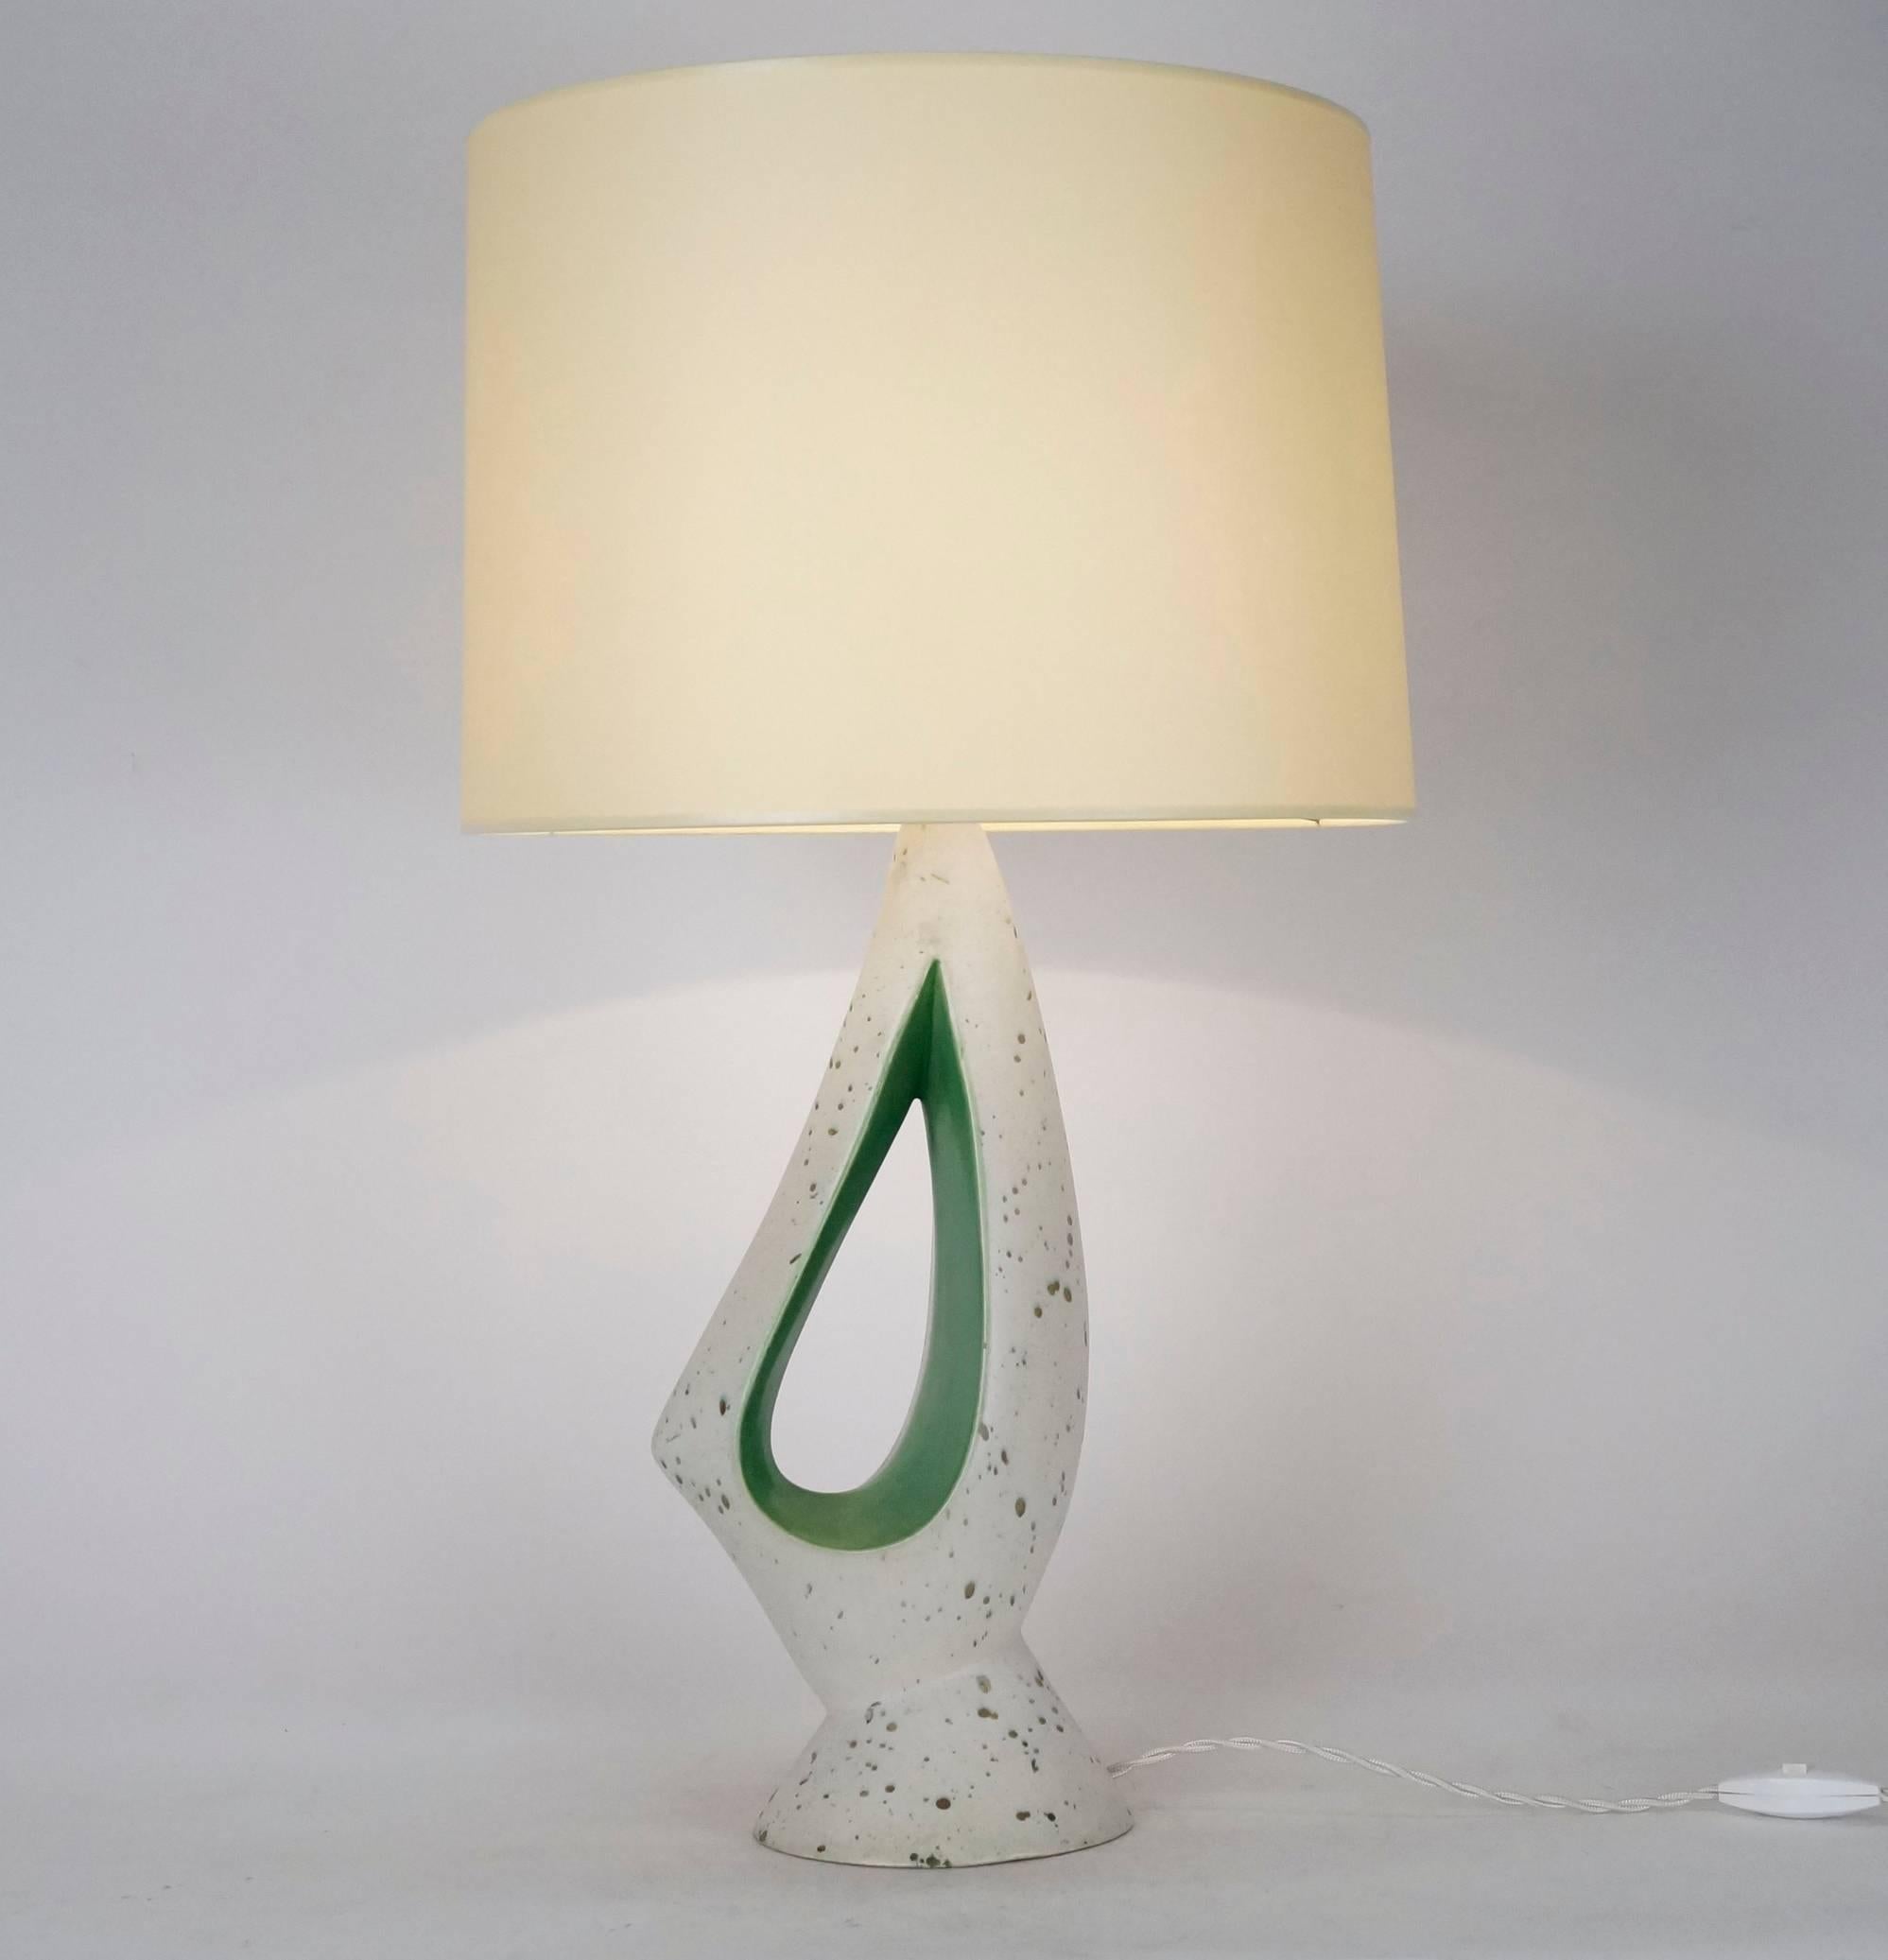 Two-tones table lamp green and white spotted.
Custom-made fabric lampshades.
Rewired with twisted silk cord.
US standard plug on request.
Measures: Ceramic height 35 cm - 13.8 in.
Height with lampshade: 57 cm - 22.4 in.
        